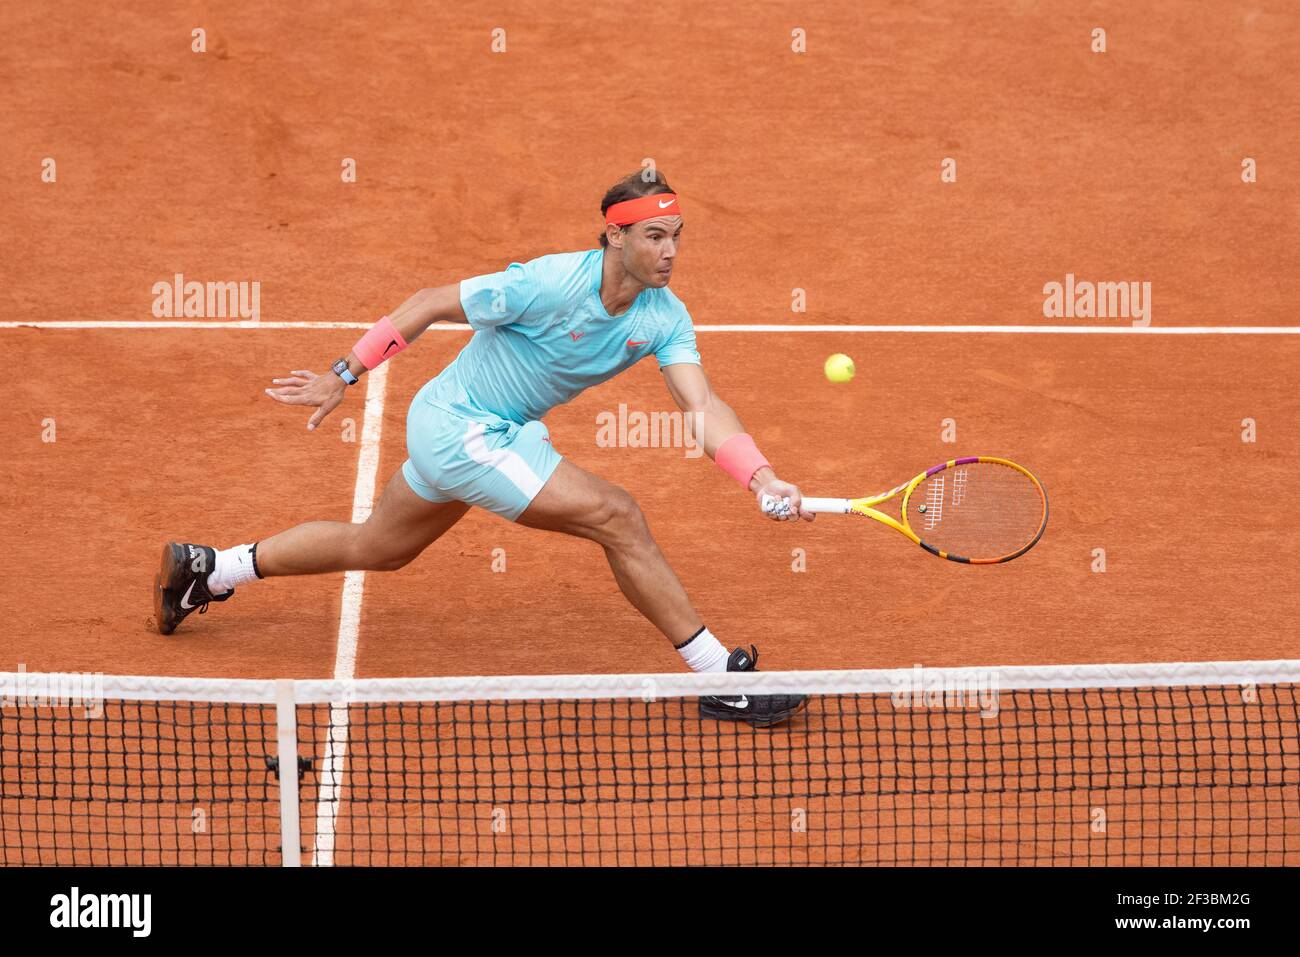 Spanish tennis player Rafael Nadal playing a forehand  volley during French Open 2020, Paris, France, Europe. Stock Photo